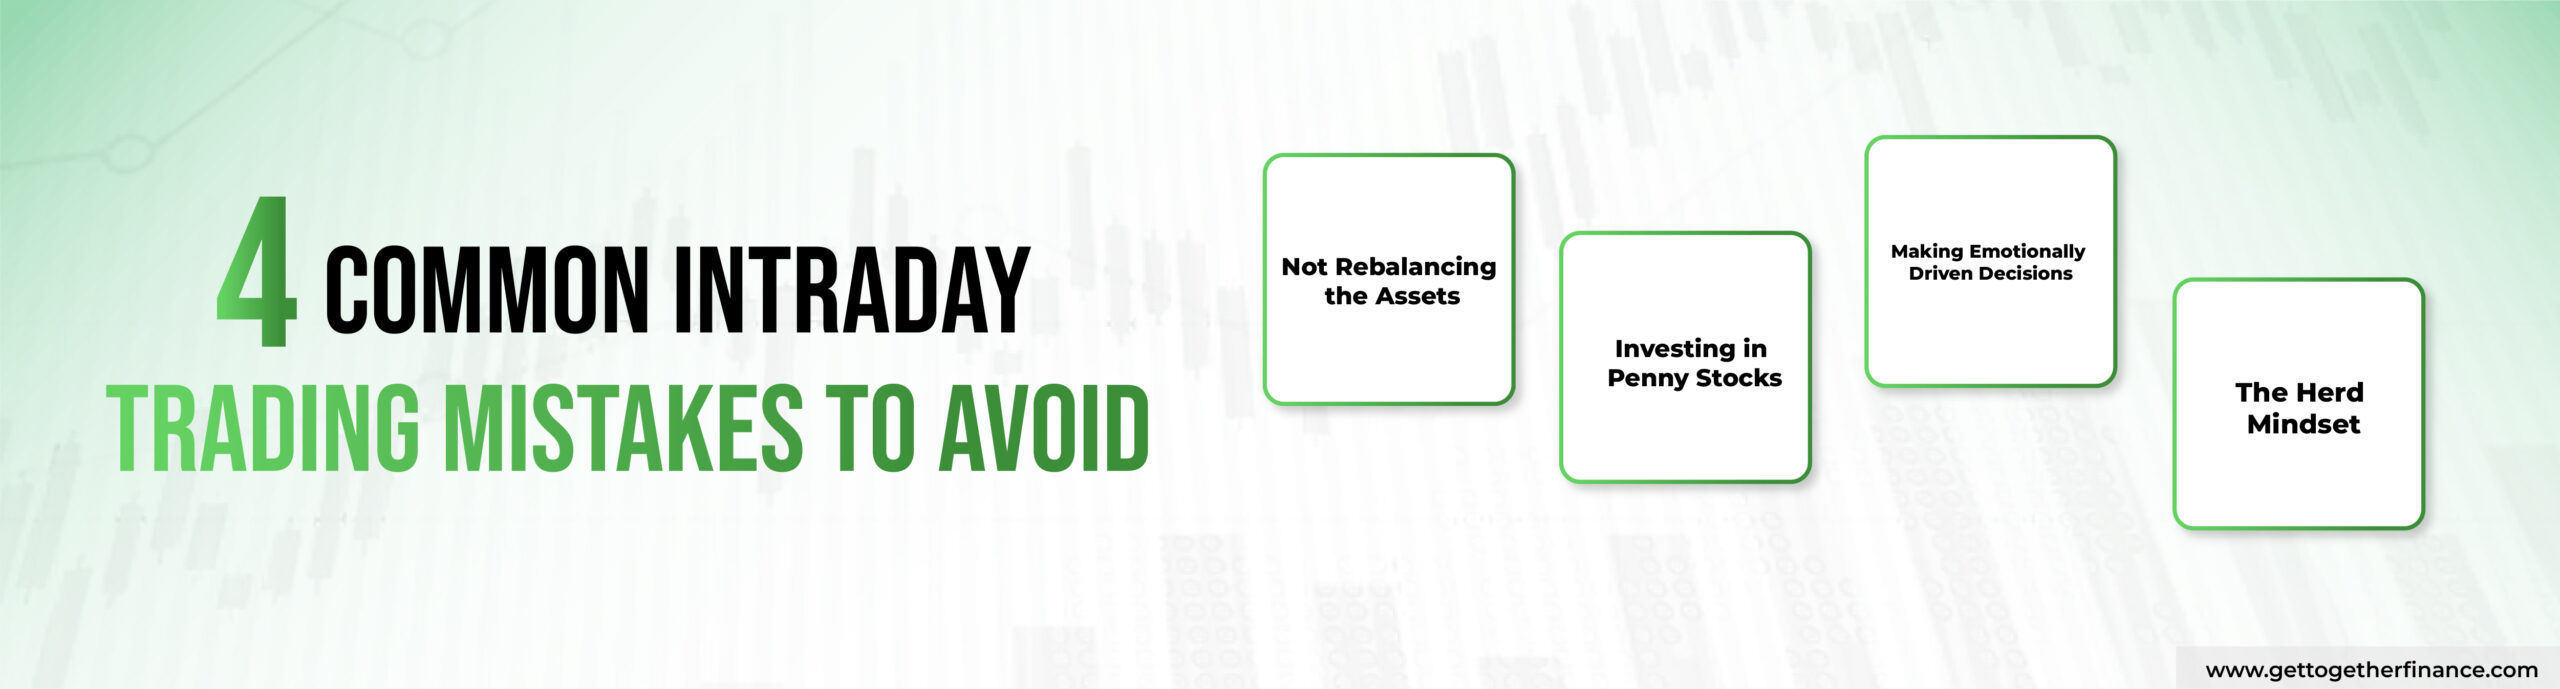 common intraday trading mistakes